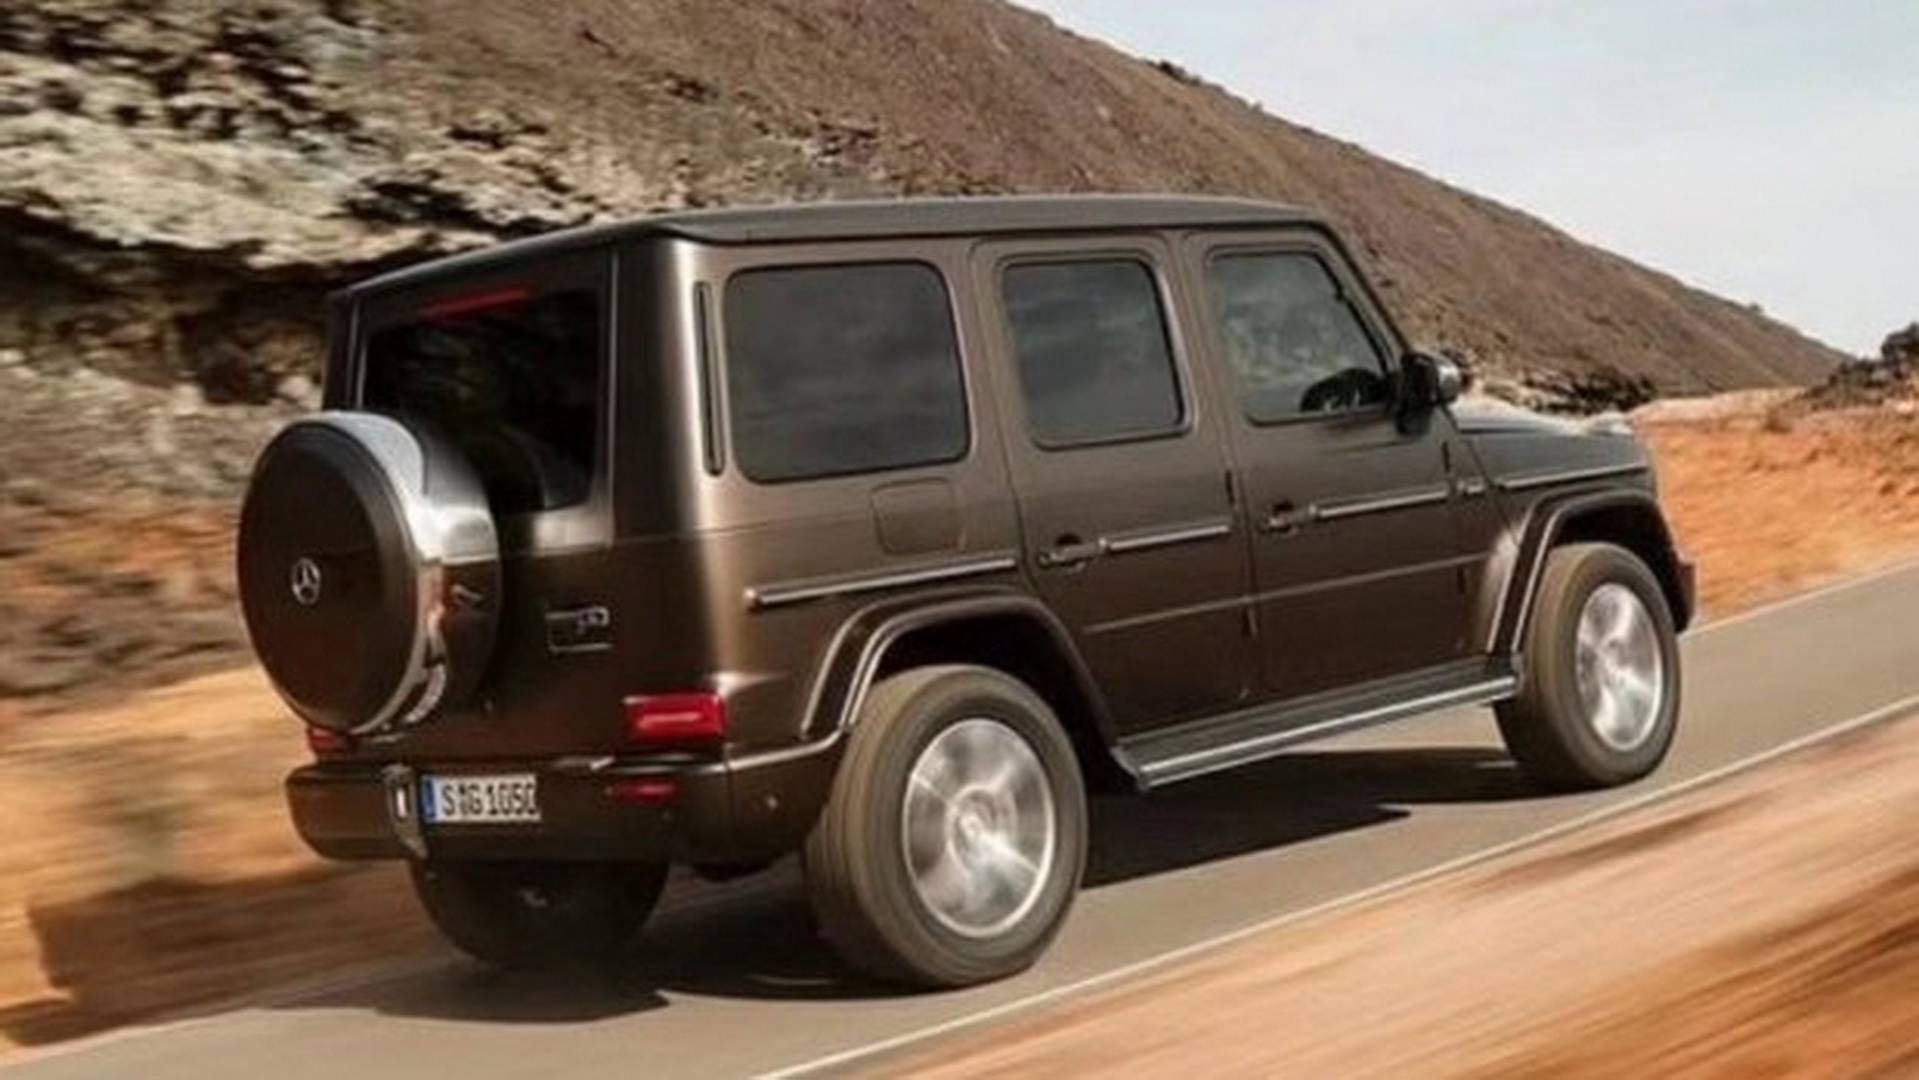 2019-mercedes-g-class-leaked-official-image.jpg